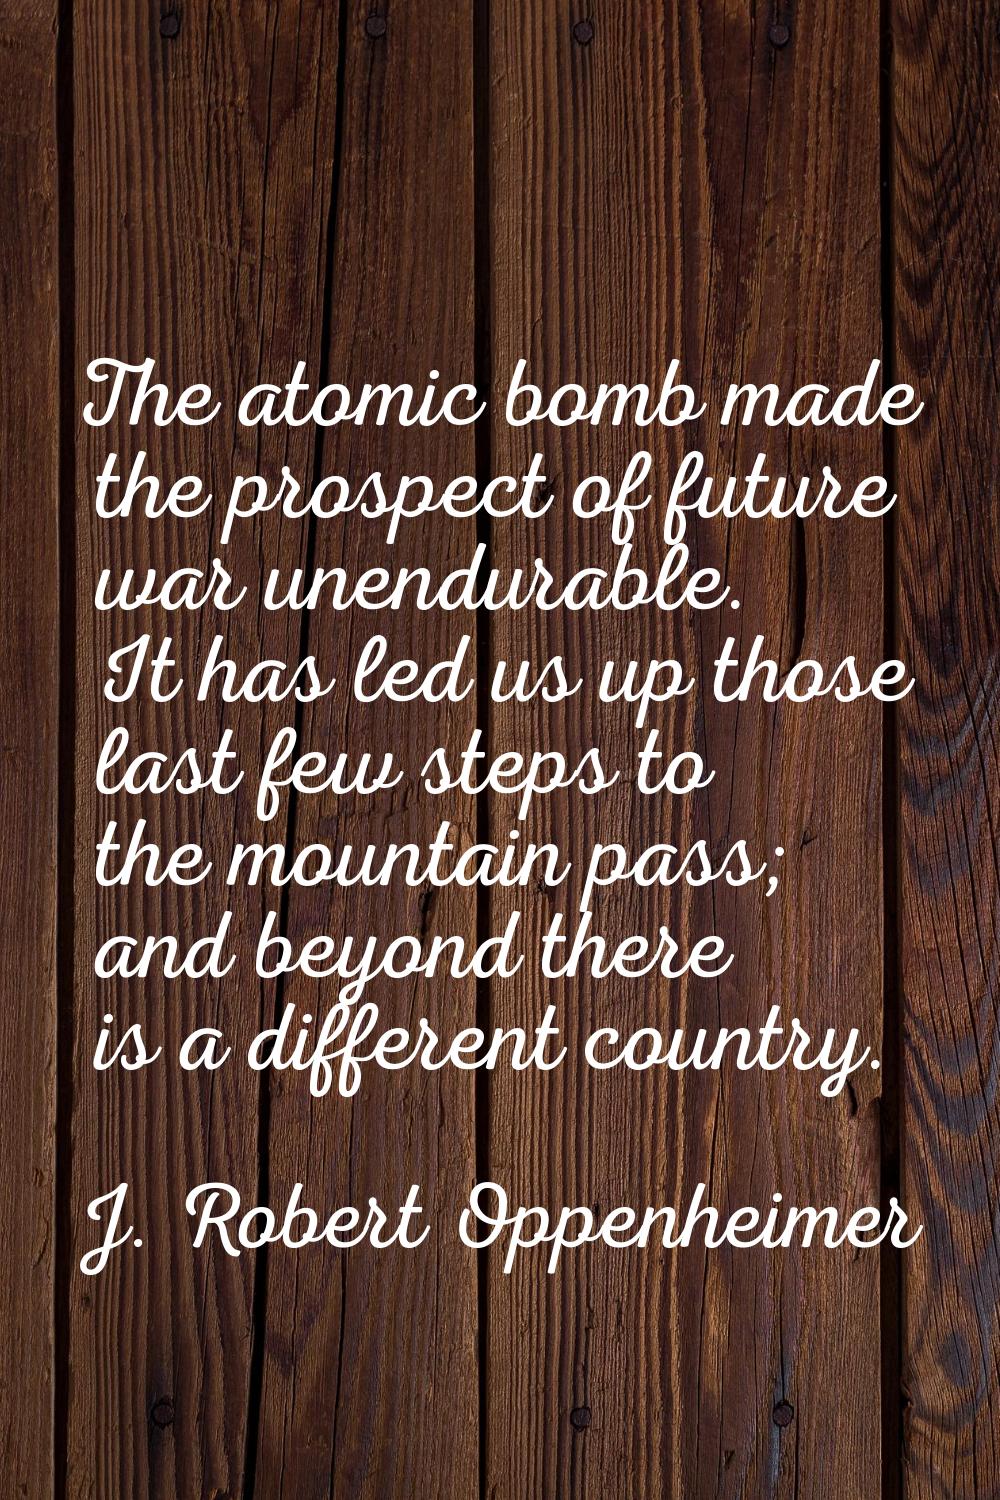 The atomic bomb made the prospect of future war unendurable. It has led us up those last few steps 